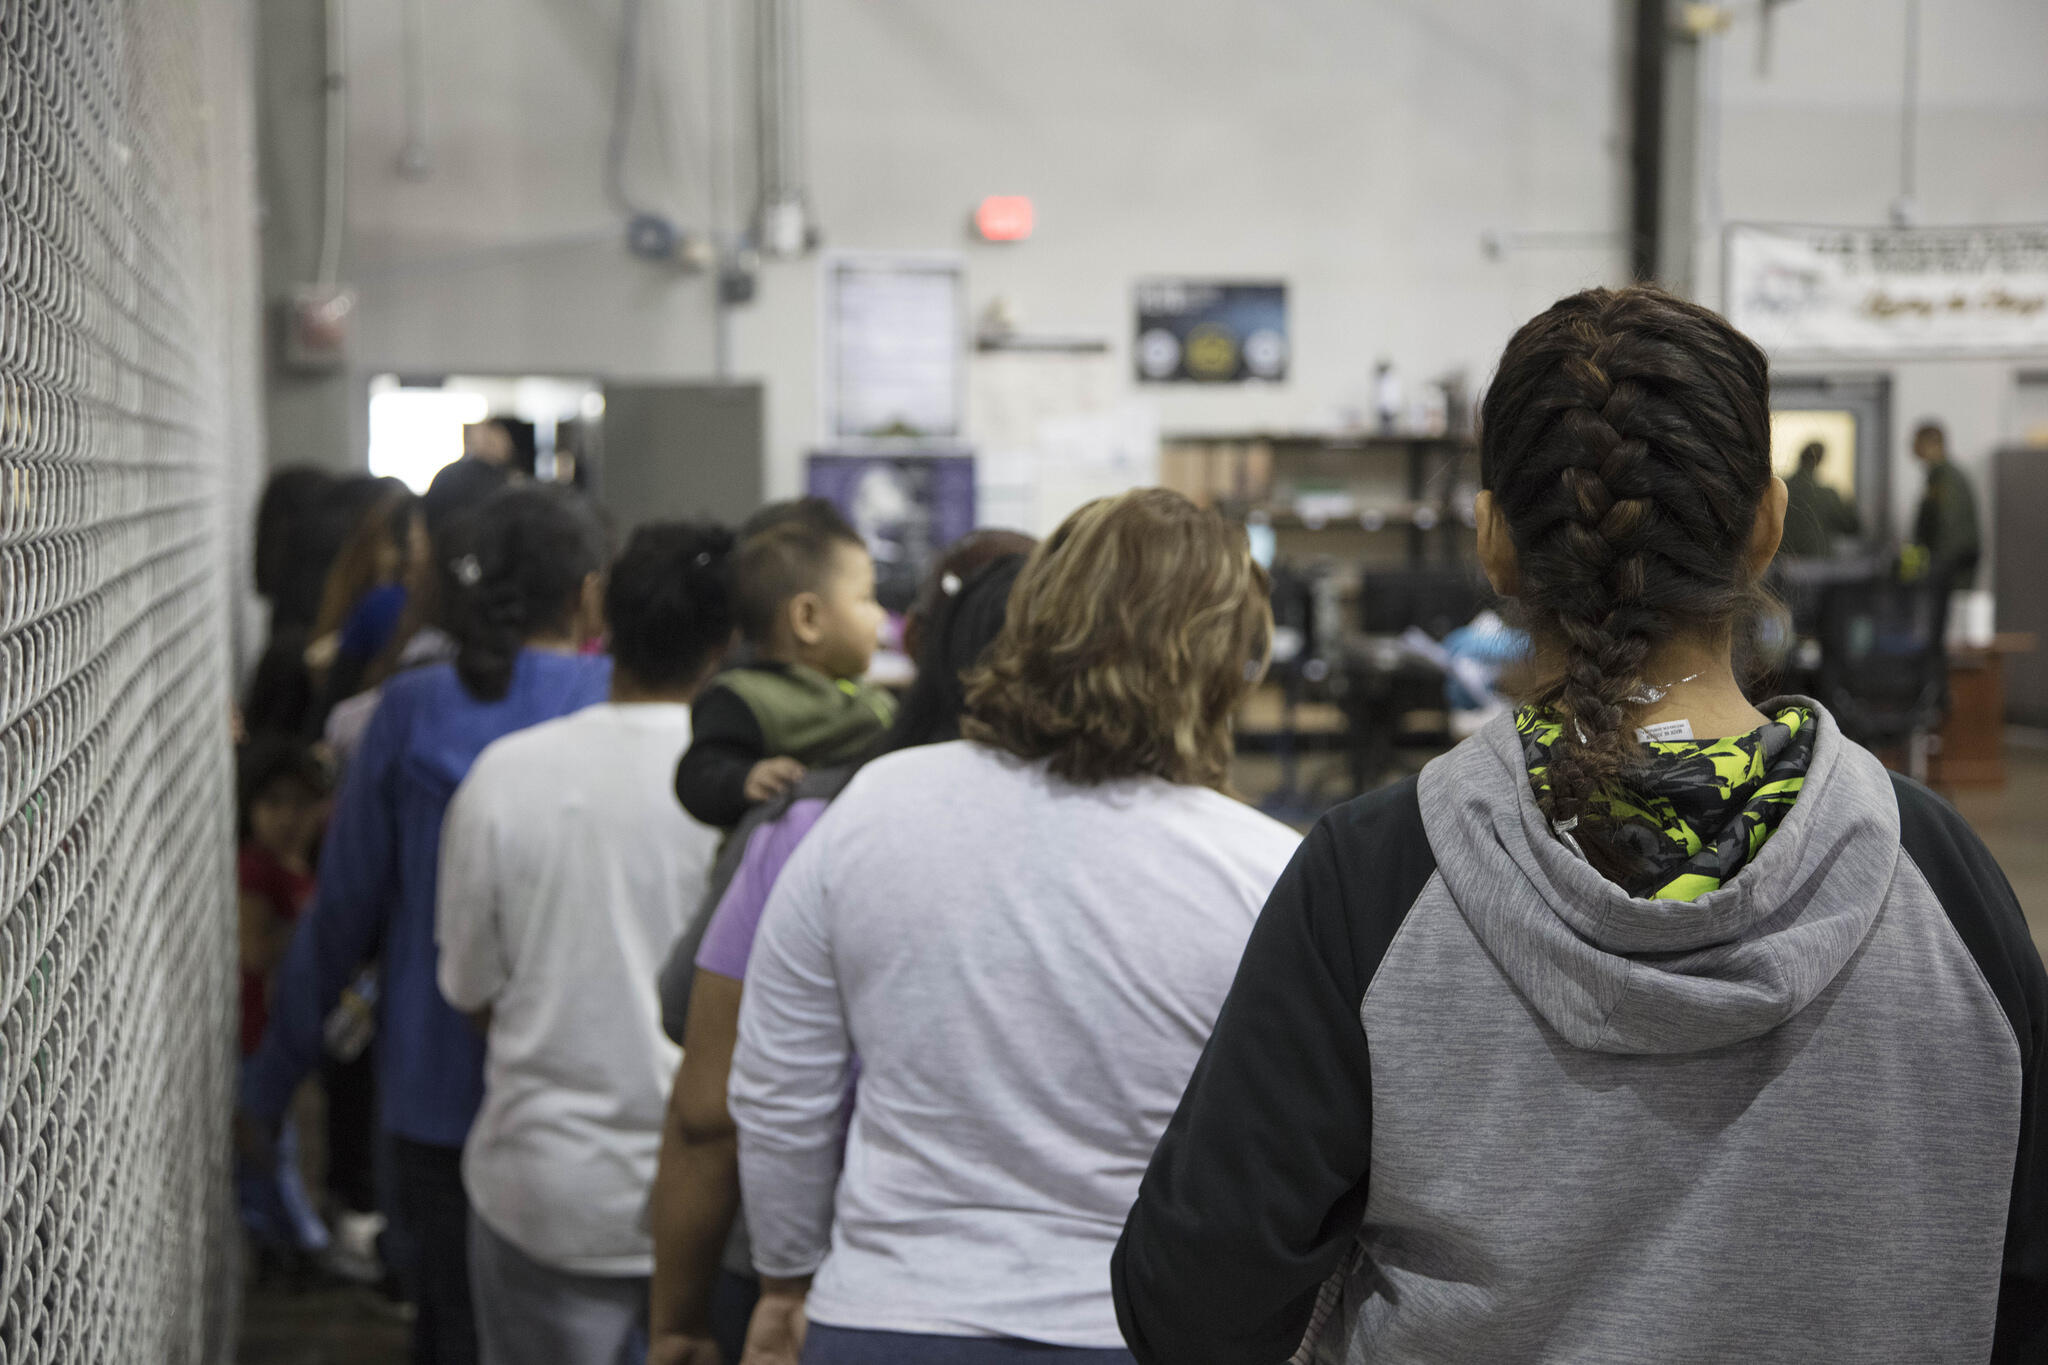 U.S. Border Patrol agents conduct intake of border crossers at the Central Processing Center in McAllen, Texas, Sunday, June 17, 2018. 